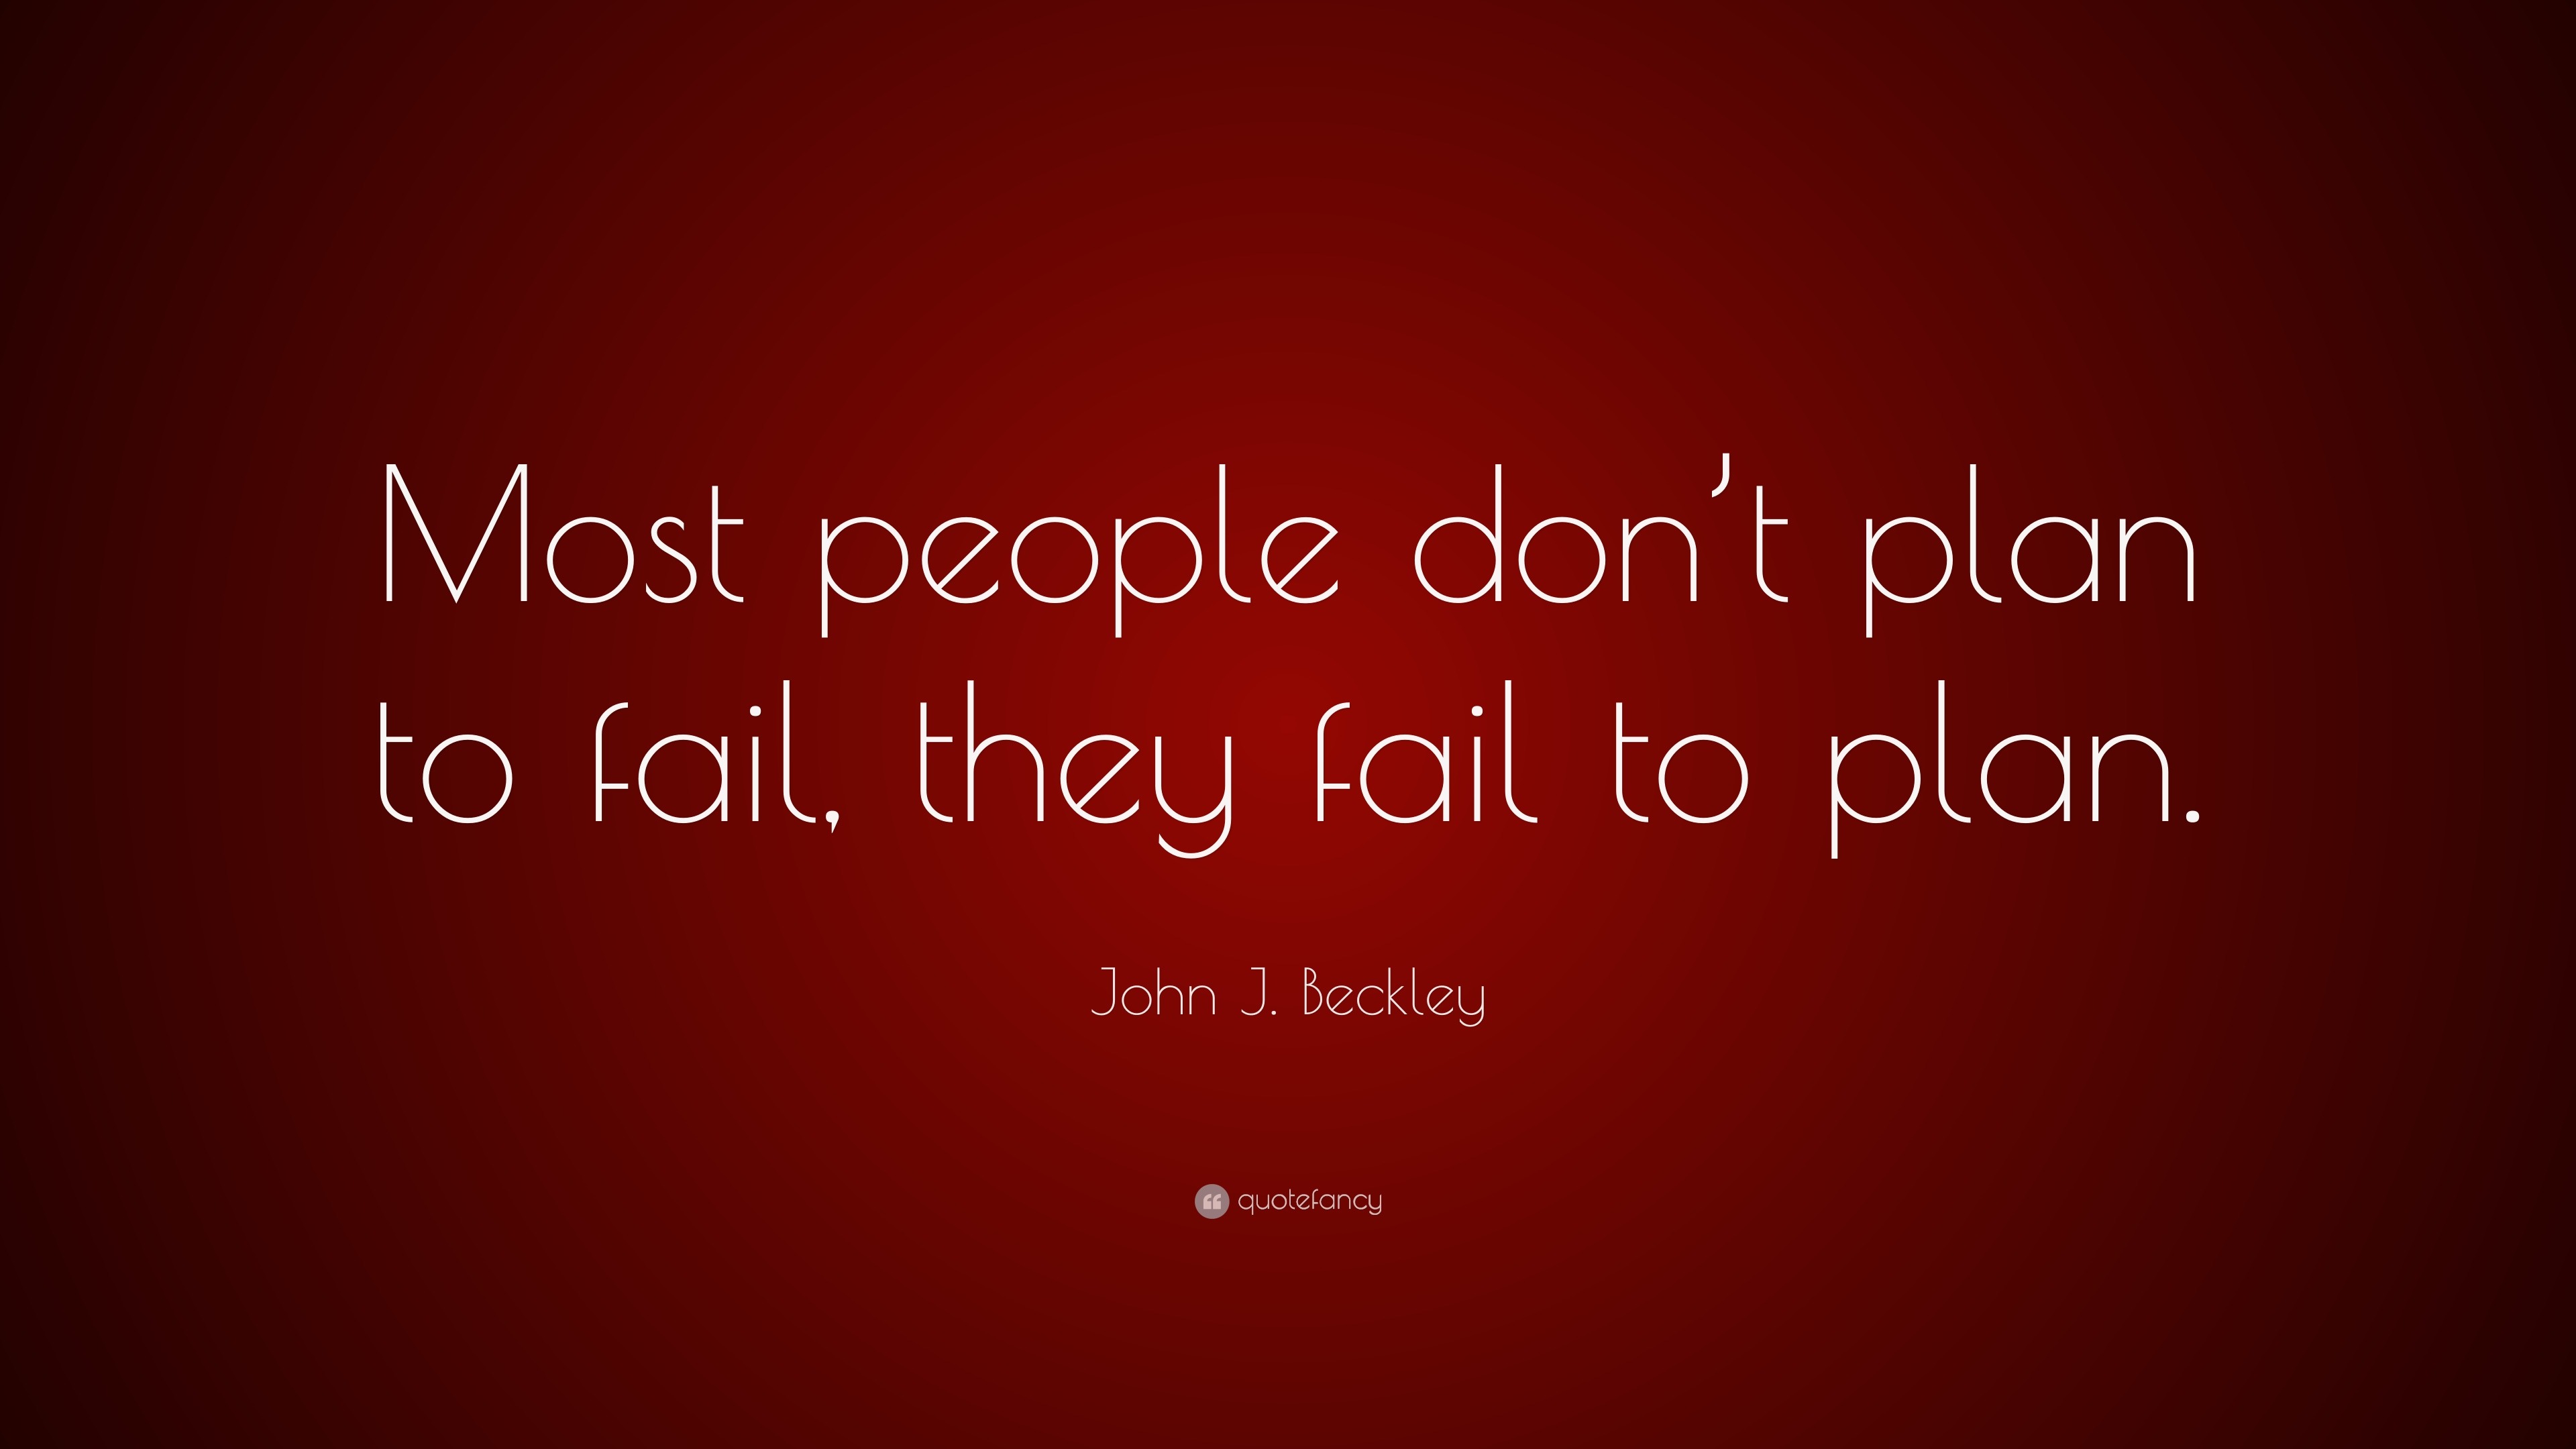 John J Beckley Quote: Most people don t plan to fail they fail to plan